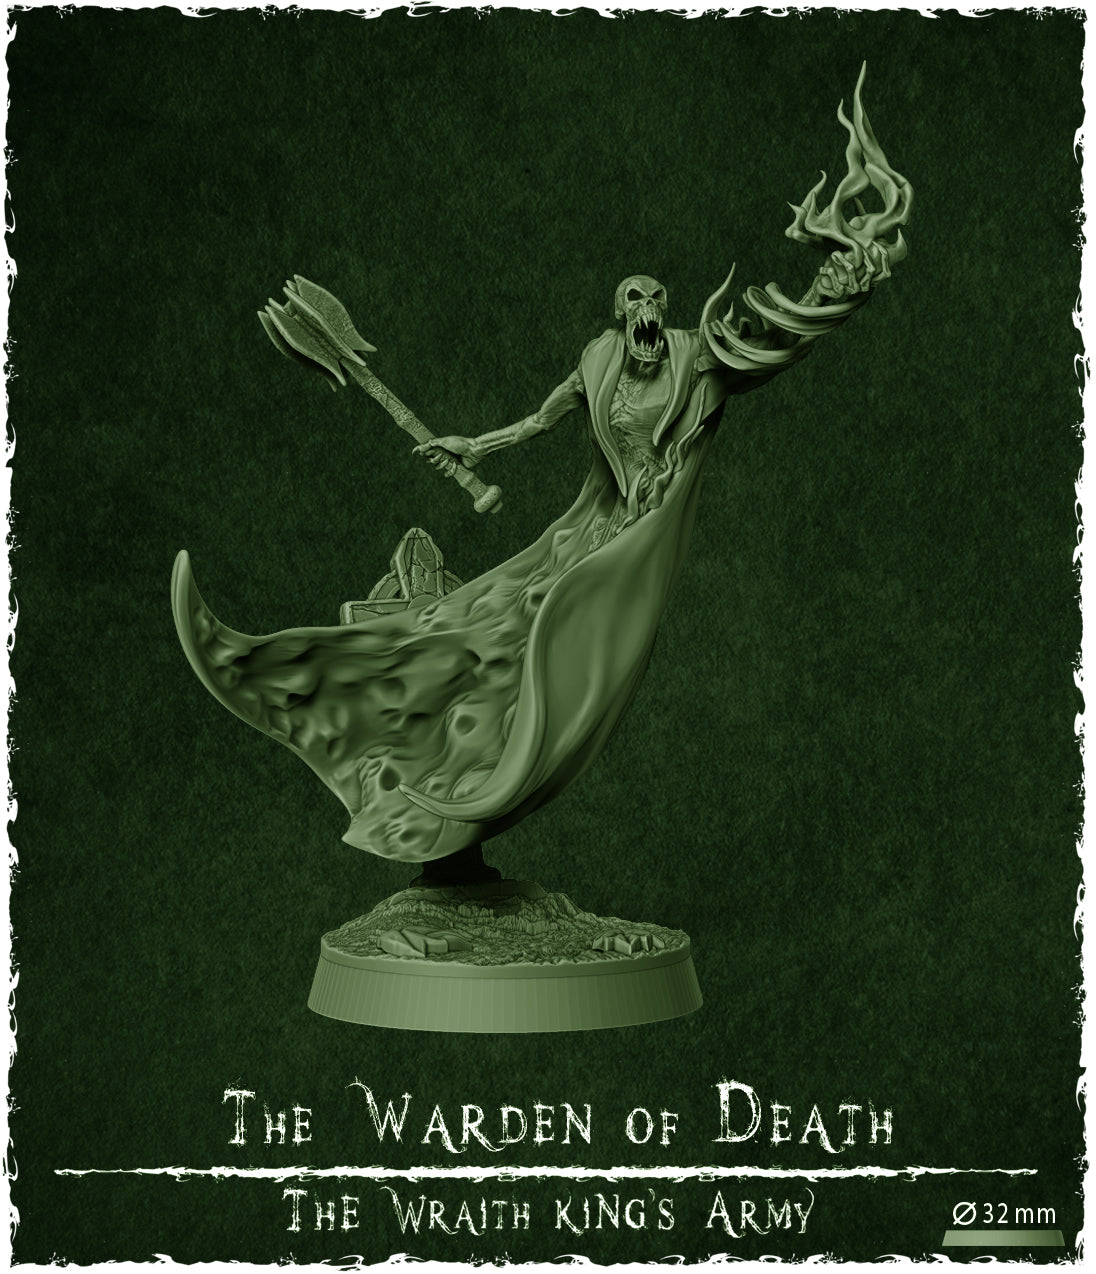 The warden of death